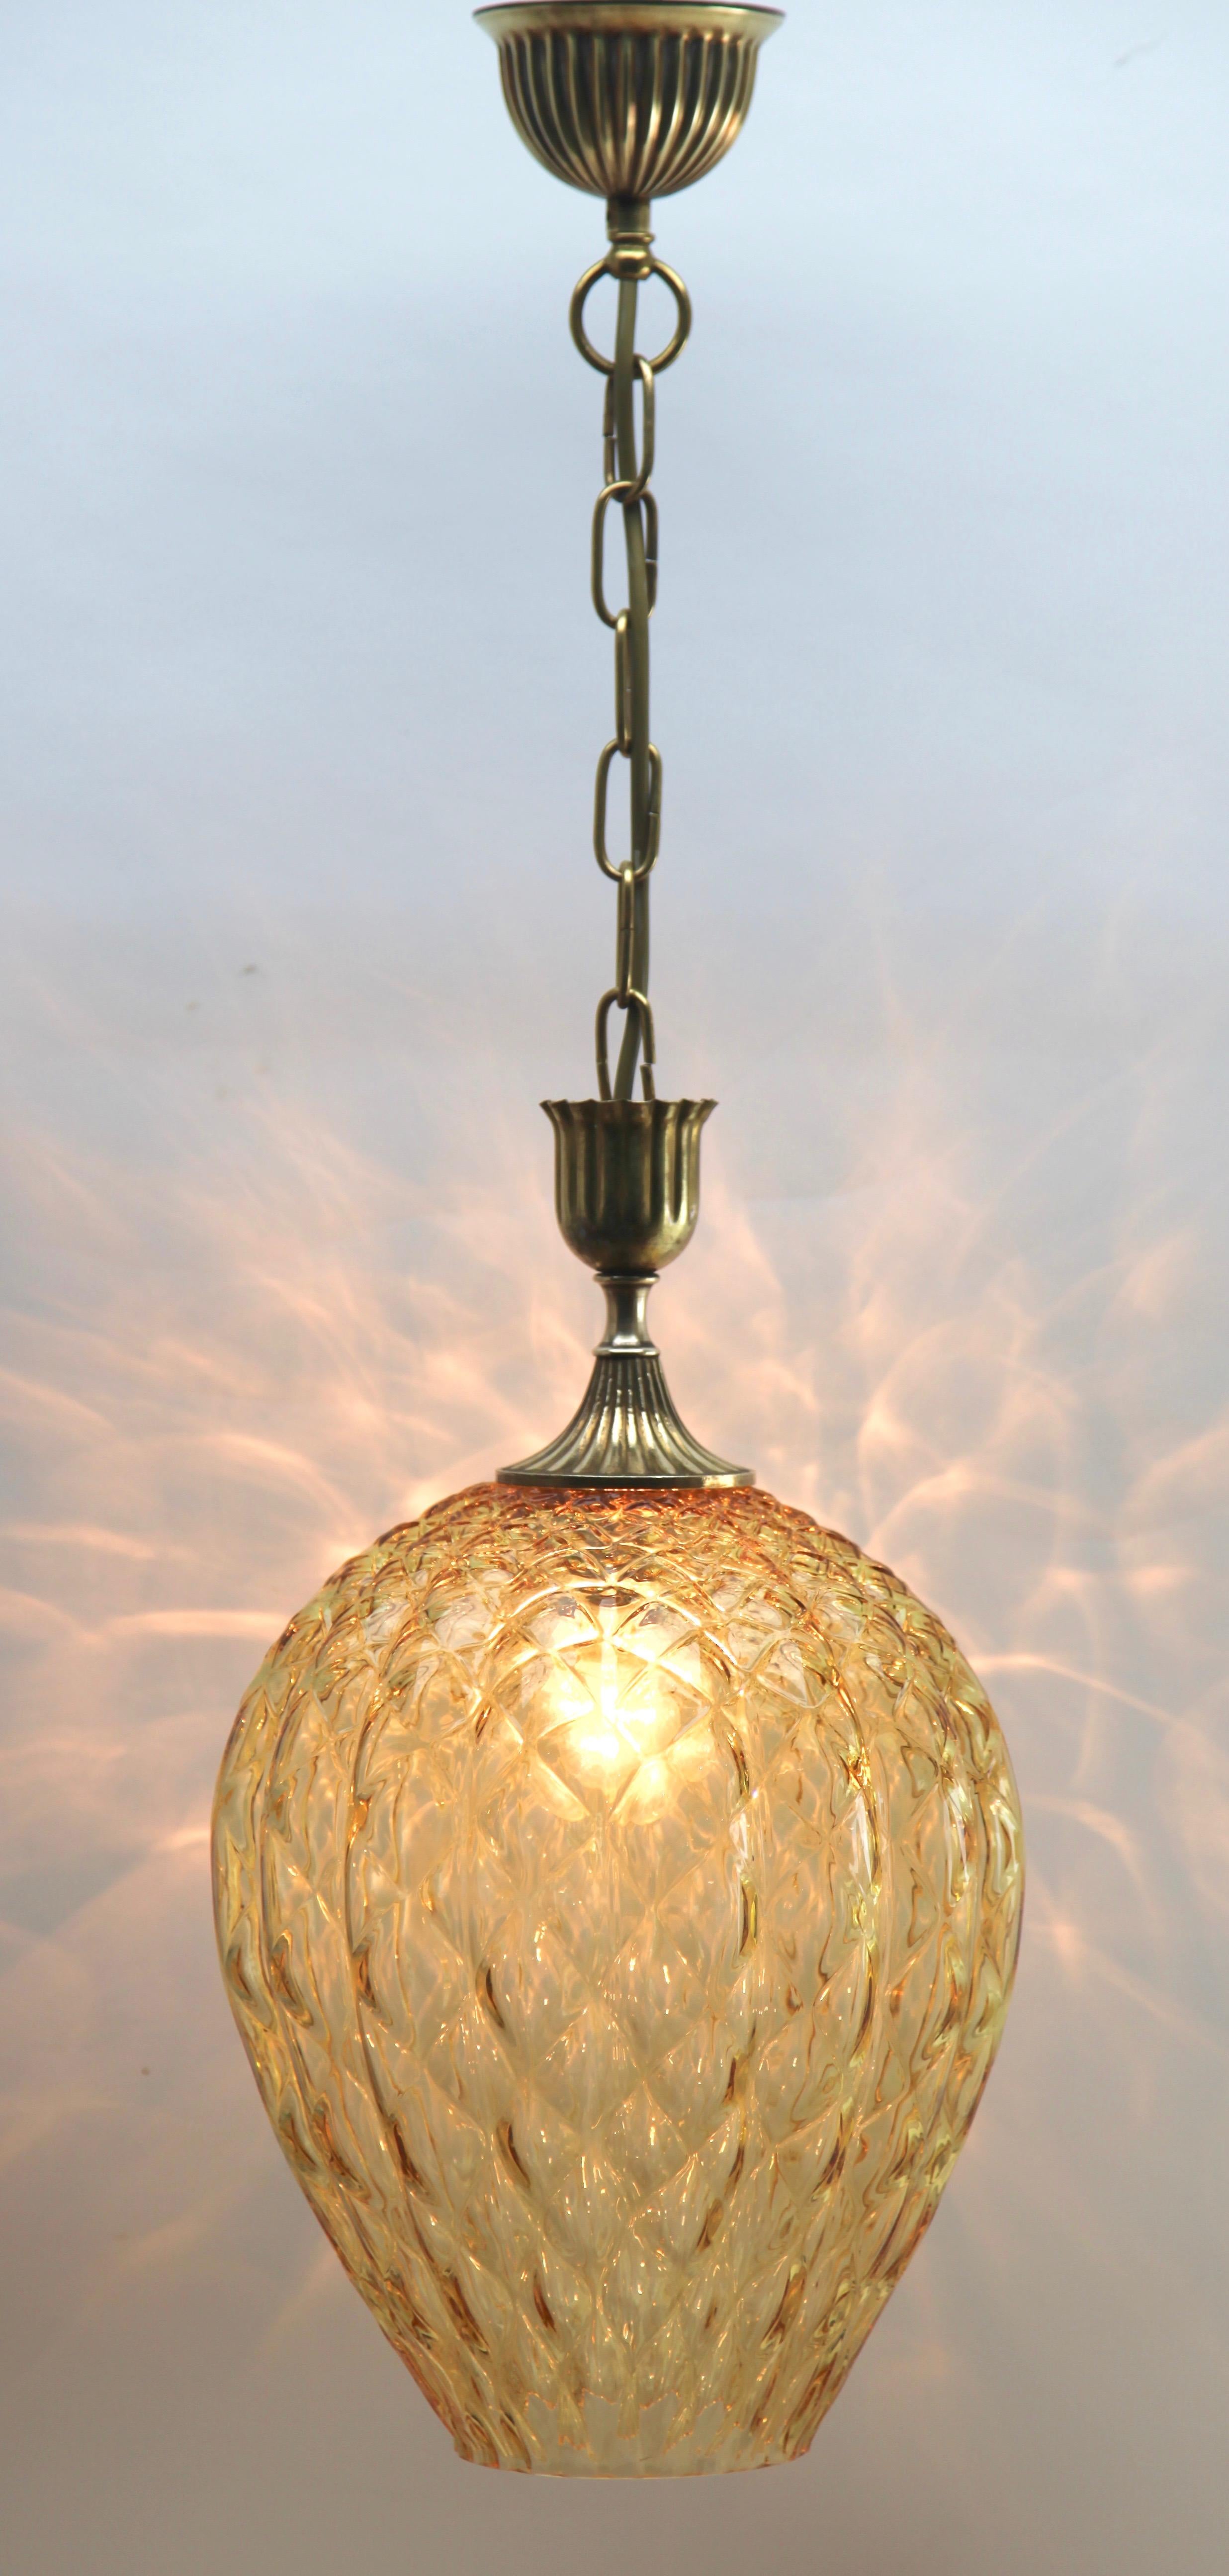 Italian glass hanging lamp with vertical ribs and a diamond optic. with a light amber tint 
Made by Empoli in the midcentury.

Photography fails to capture the simple elegant illumination provided by this lamp.

In excellent condition having